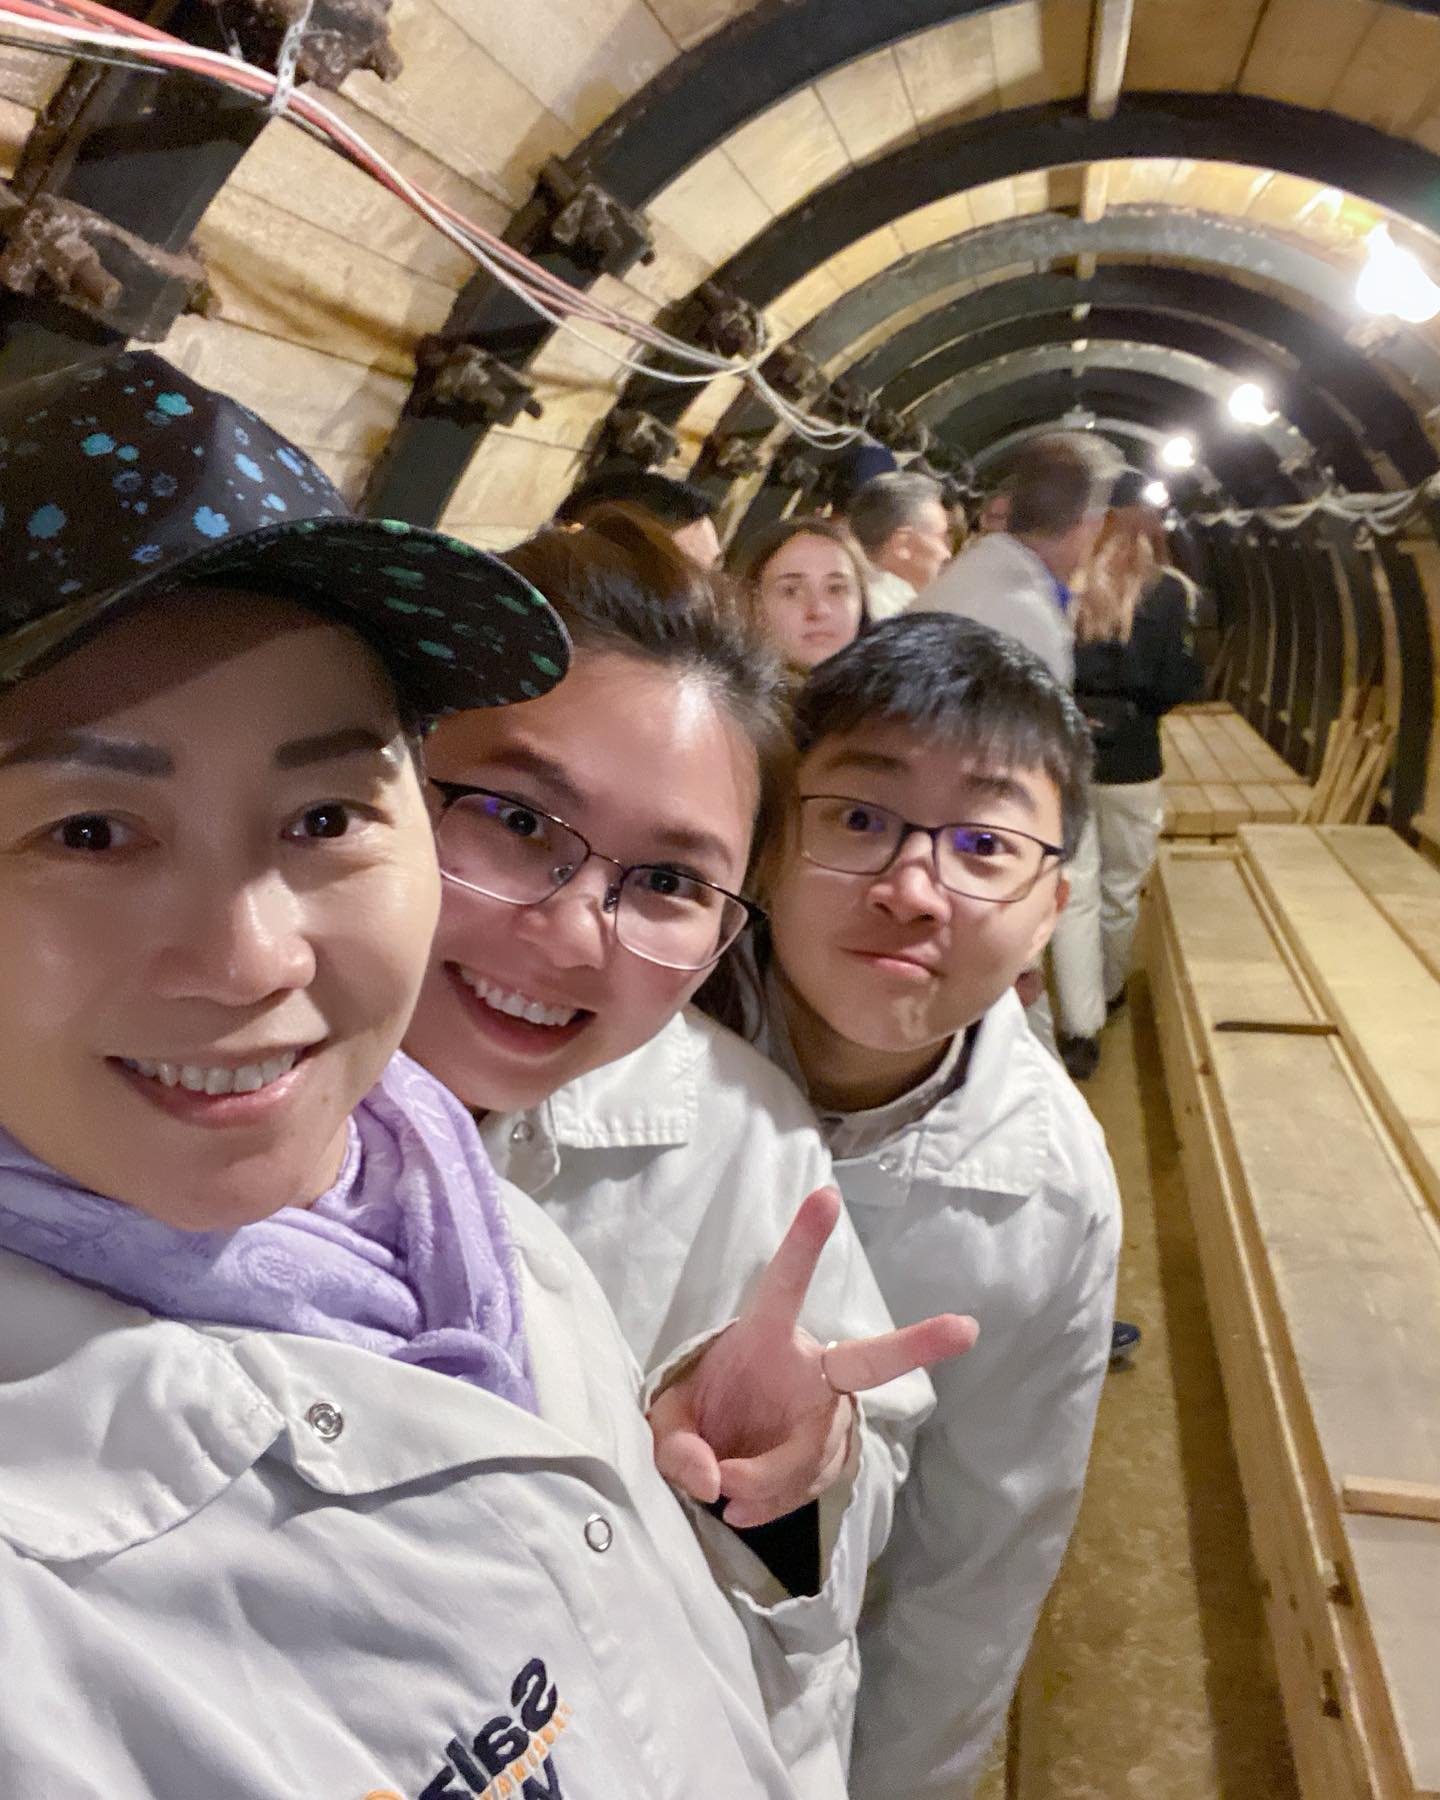 Visiting the oldest salt mine in the world, the Hallstatt Salt Mine. It is a fun and educational journey inside the mountains. The rides on the original mine train and slides are memorable:)
@jiaxinde23 @pehlinde23 
#austria #salzburg #hallstatt #sal